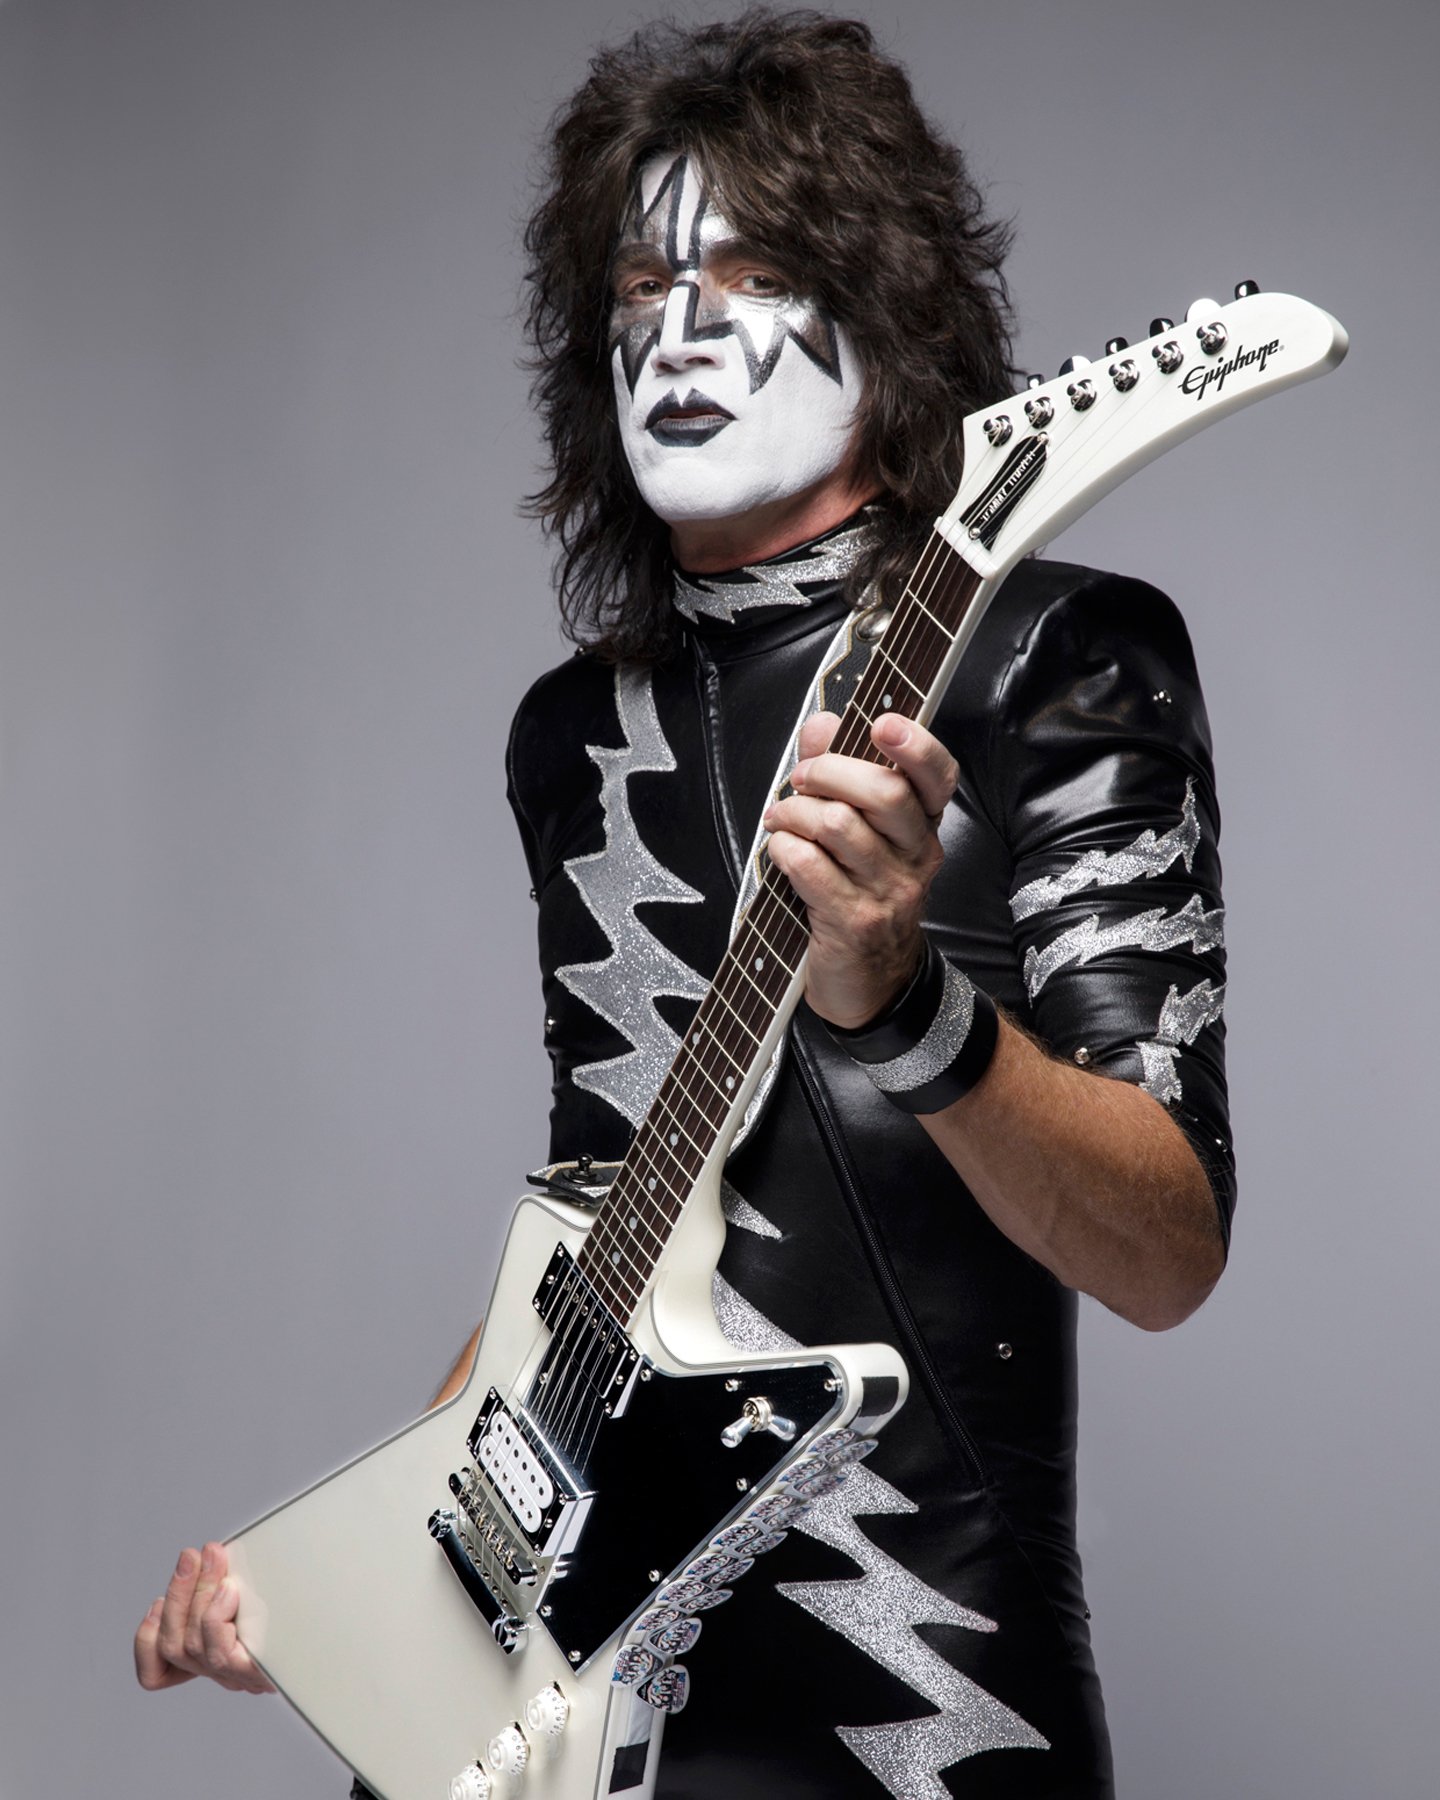 Tommy Thayer Your STAGE PLAYED White Lightning Explorer For Spain & Portugal In July. Includes Personal Backstage Meet Greet, Autographs & Photo With TT